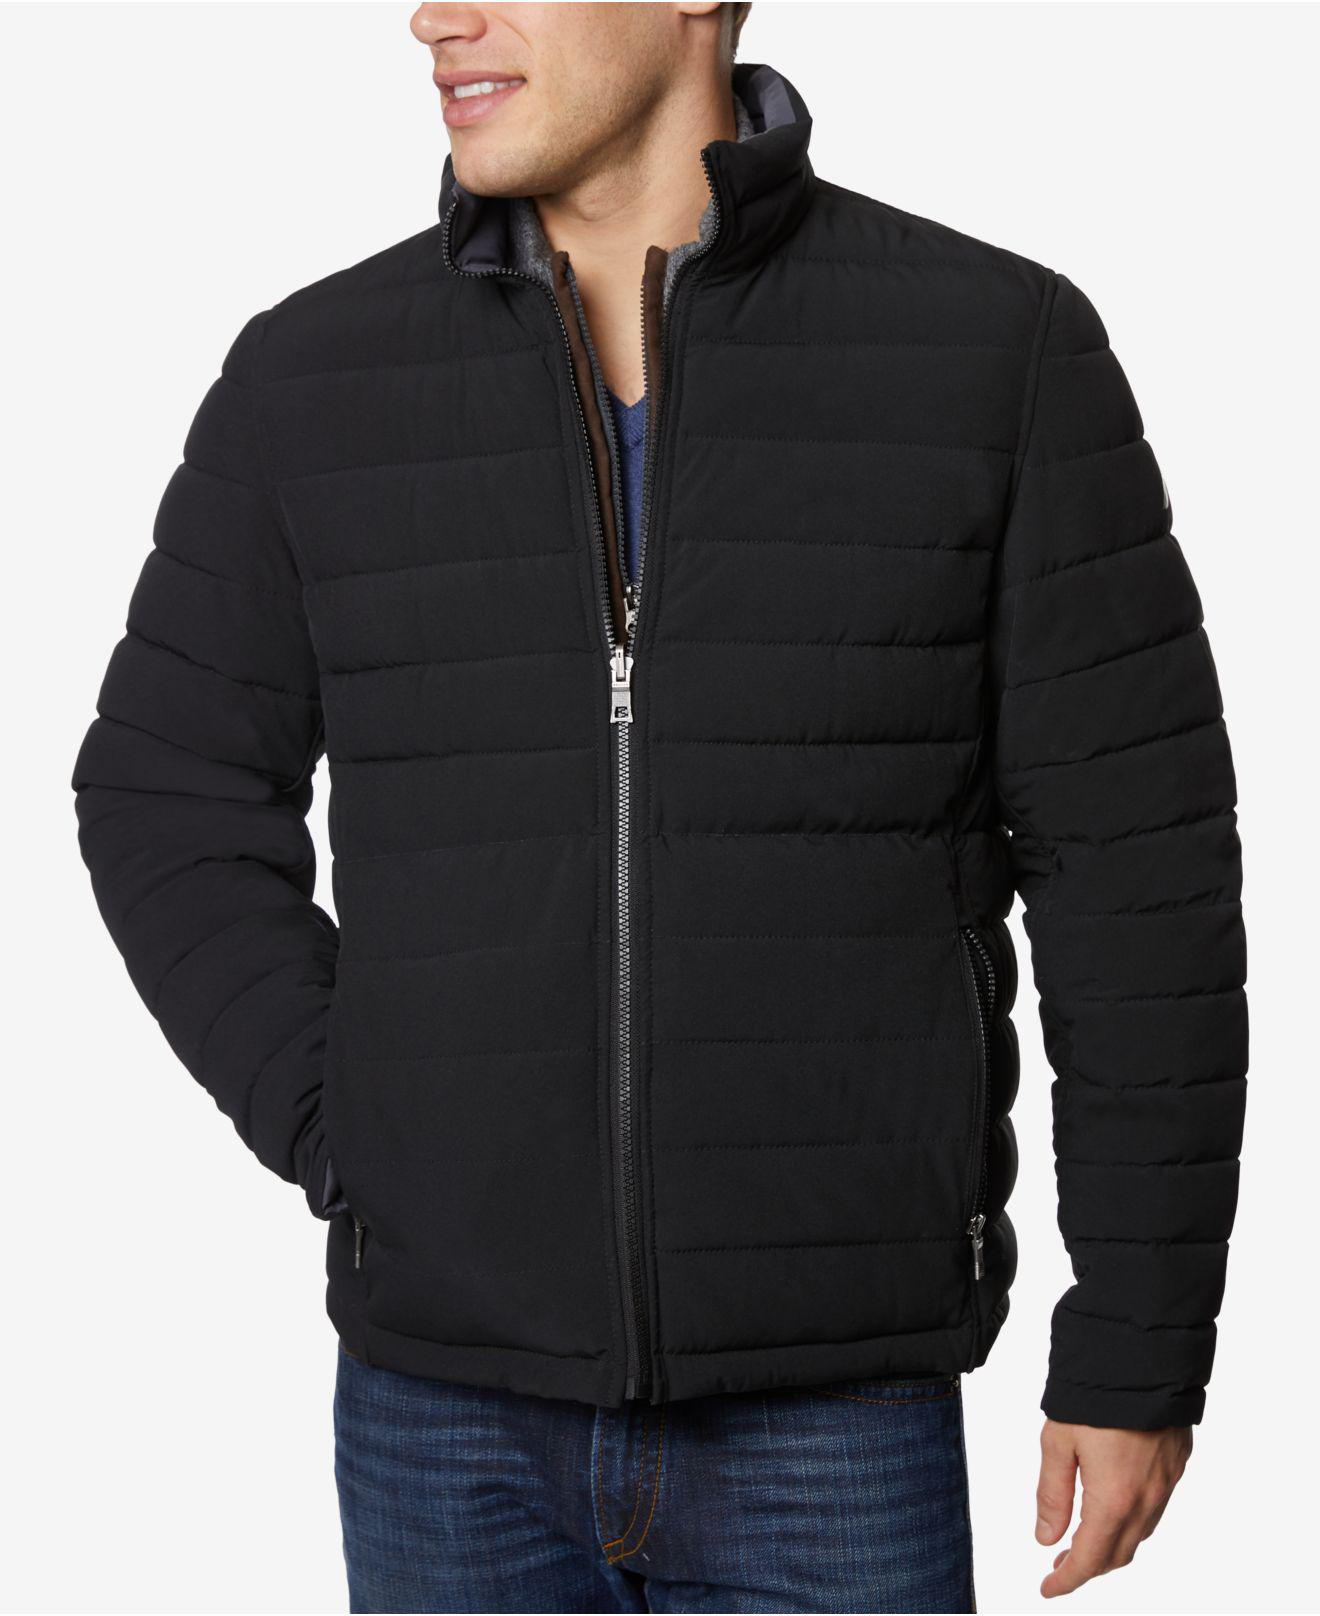 Nautica Synthetic Big & Tall Stretch Reversible Jacket in Black/Grey ...